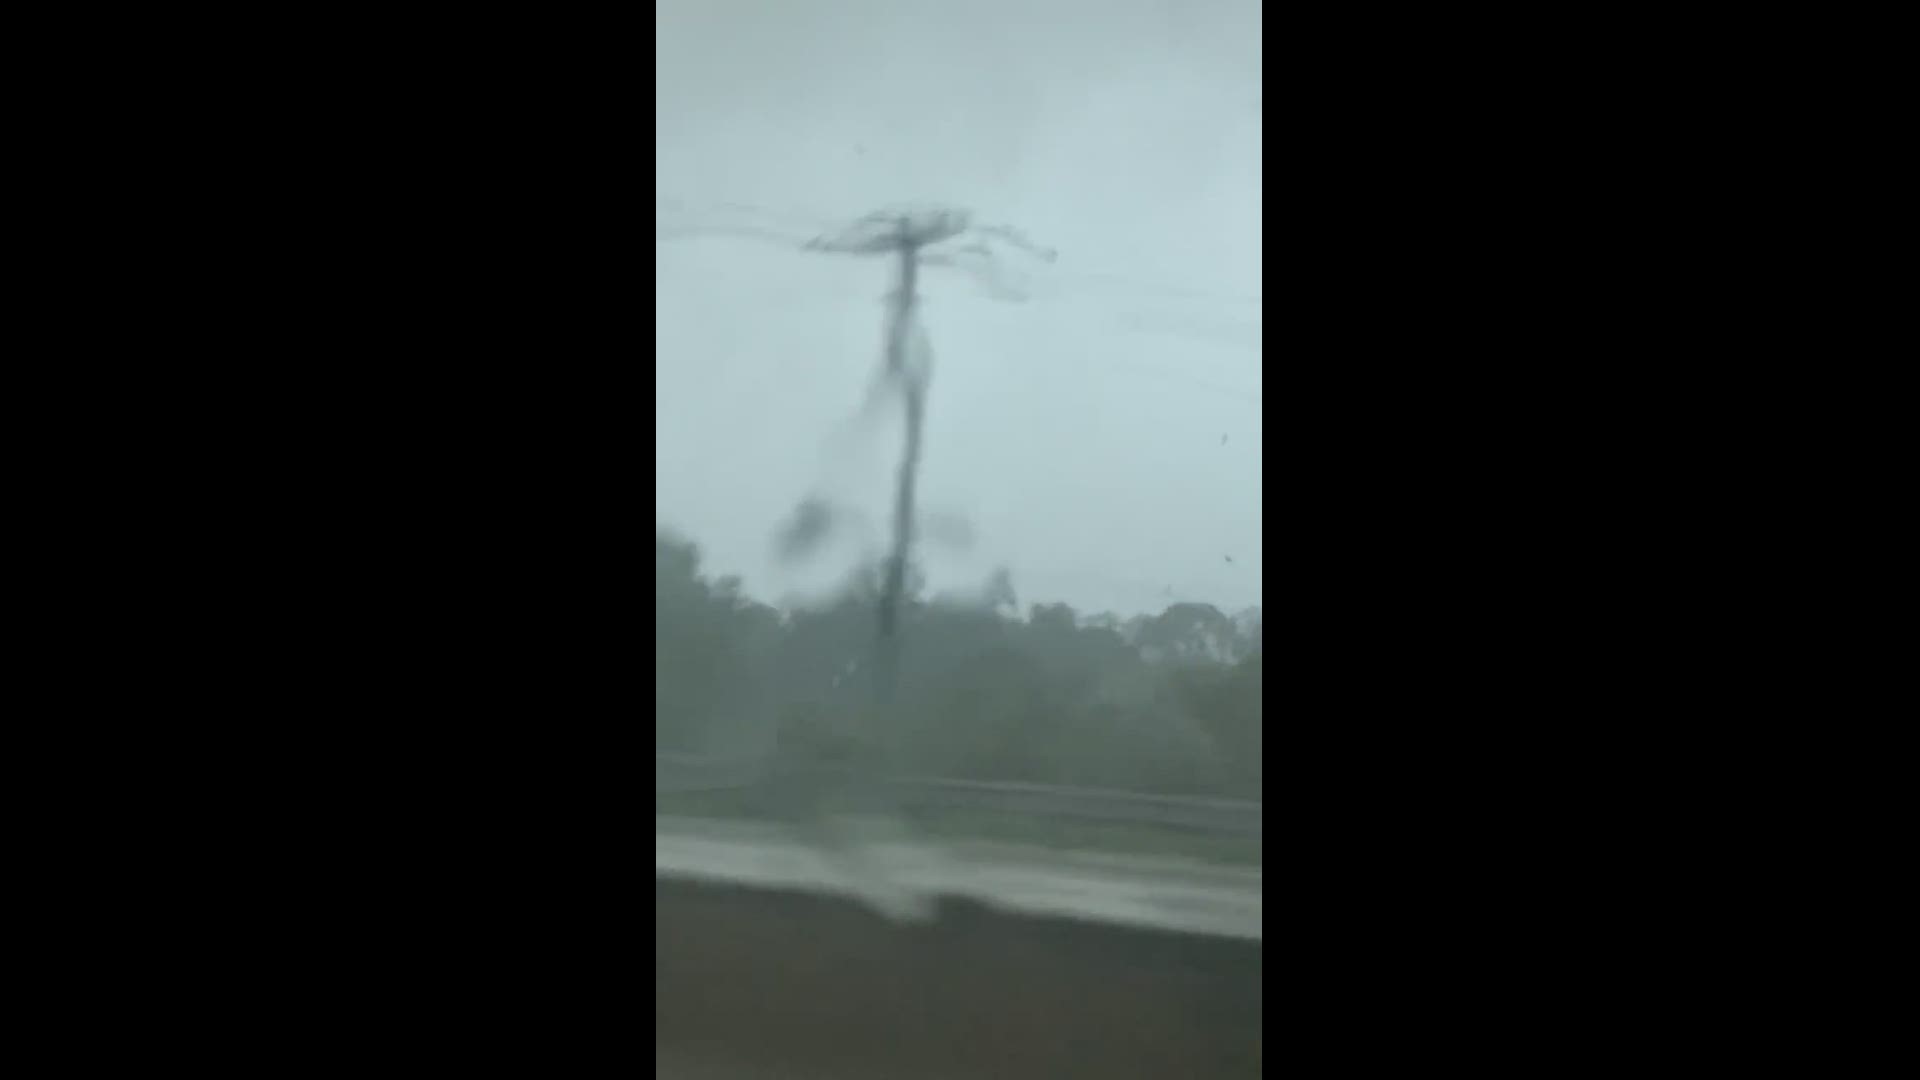 A First Coast News viewer captured what appears to be a tornado while driving on I-95 at University.
Credit: Eric Livingston